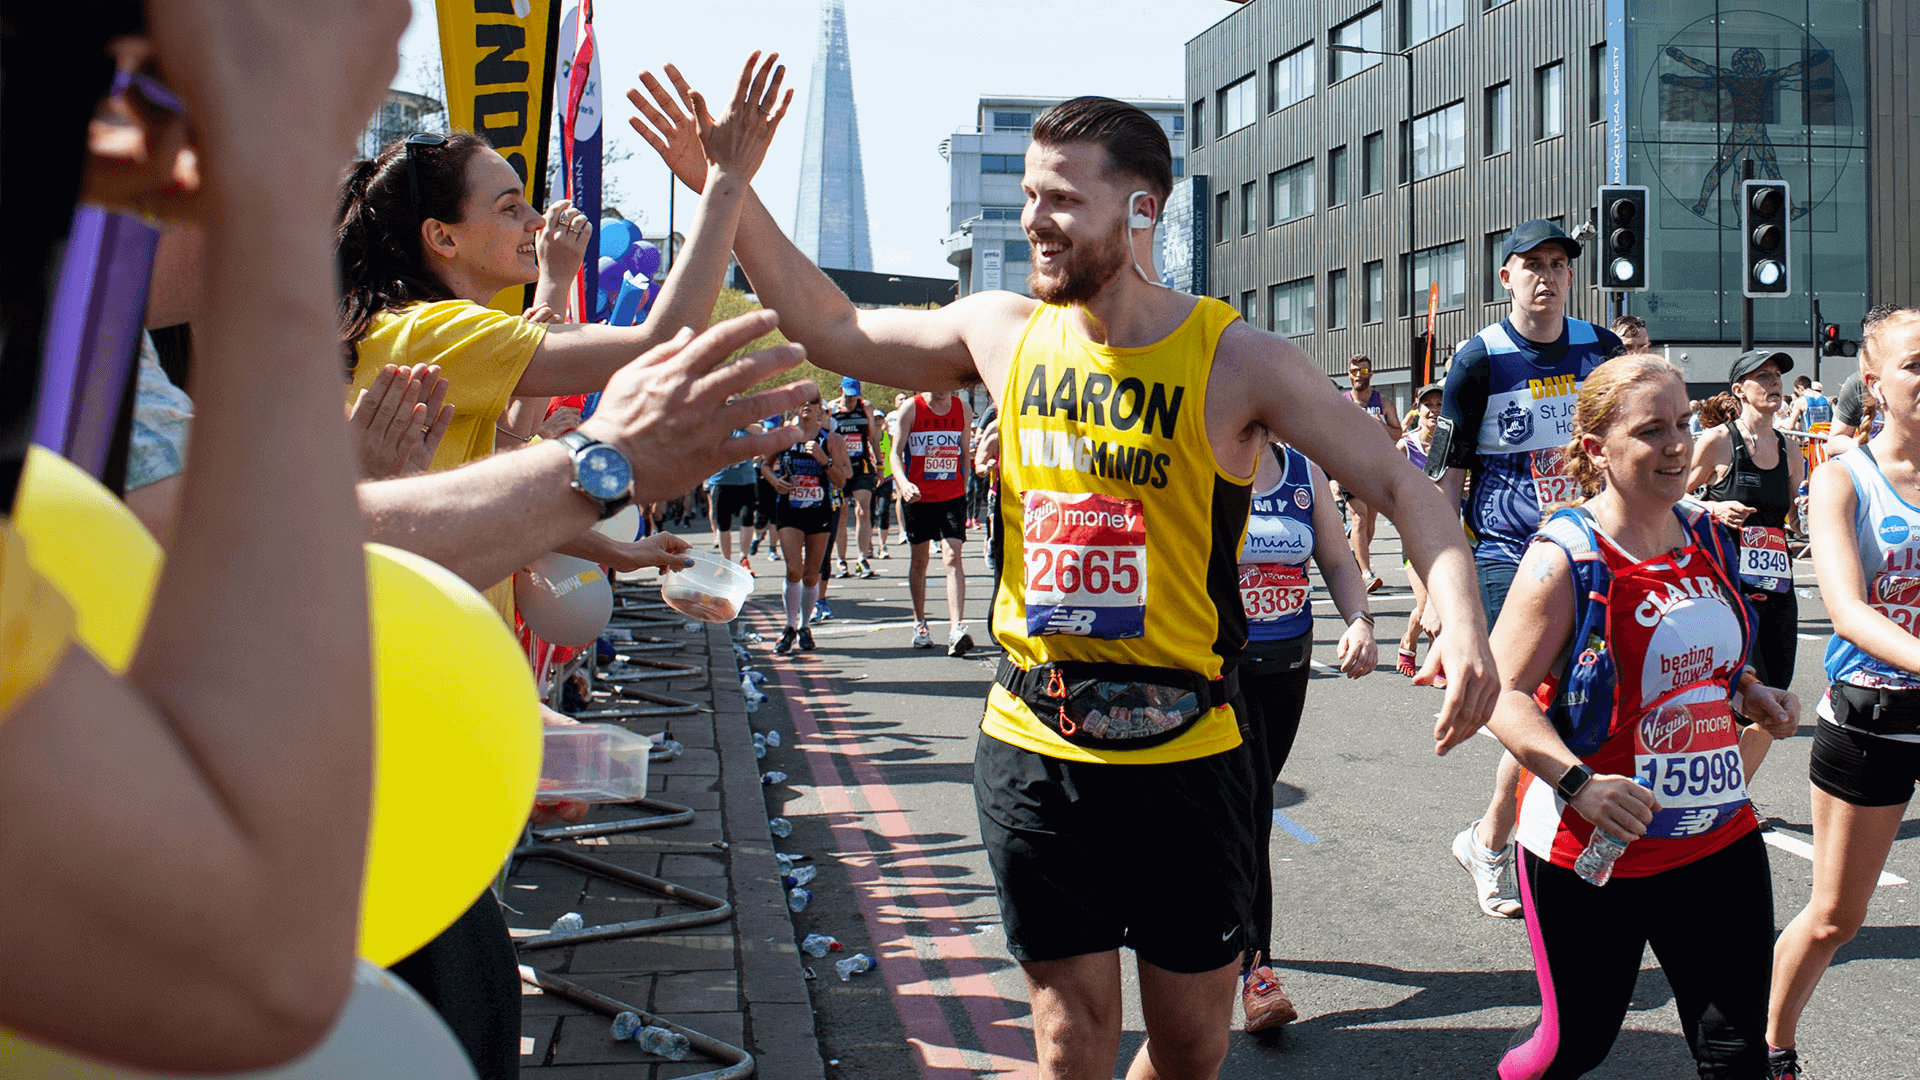 Runner gives a high five to a YoungMinds cheerer in the crowd during a marathon